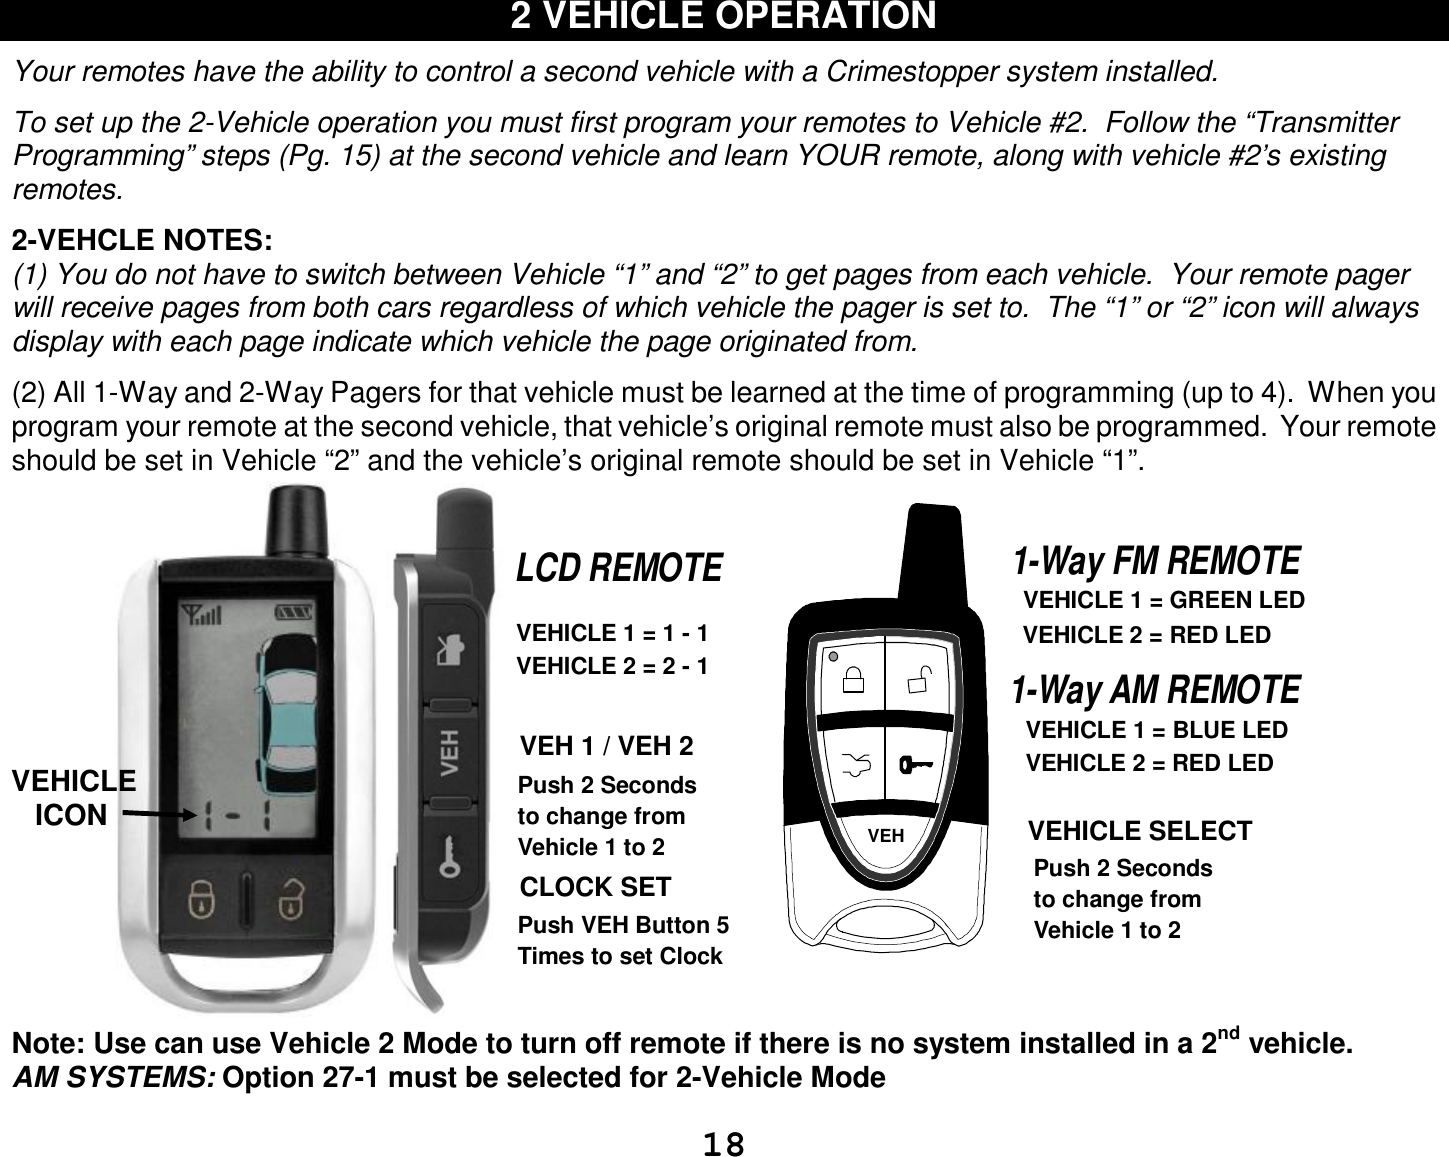  18 2 VEHICLE OPERATION  Your remotes have the ability to control a second vehicle with a Crimestopper system installed.  To set up the 2-Vehicle operation you must first program your remotes to Vehicle #2.  Follow the “Transmitter Programming” steps (Pg. 15) at the second vehicle and learn YOUR remote, along with vehicle #2’s existing remotes.  2-VEHCLE NOTES: (1) You do not have to switch between Vehicle “1” and “2” to get pages from each vehicle.  Your remote pager will receive pages from both cars regardless of which vehicle the pager is set to.  The “1” or “2” icon will always display with each page indicate which vehicle the page originated from.  (2) All 1-Way and 2-Way Pagers for that vehicle must be learned at the time of programming (up to 4).  When you program your remote at the second vehicle, that vehicle’s original remote must also be programmed.  Your remote should be set in Vehicle “2” and the vehicle’s original remote should be set in Vehicle “1”. VEH 1 / VEH 2CLOCK SET Push 2 Secondsto change fromVehicle 1 to 2VEHICLE 1 = GREEN LEDVEHICLE 2 = RED LEDPush 2 Secondsto change fromVehicle 1 to 2 VEHICLE SELECTPush VEH Button 5 Times to set ClockVEHICLE 1 = 1 - 1VEHICLE 2 = 2 - 11-Way FM REMOTELCD REMOTEVEH1-Way AM REMOTEVEHICLE 1 = BLUE LEDVEHICLE 2 = RED LED Note: Use can use Vehicle 2 Mode to turn off remote if there is no system installed in a 2nd vehicle. AM SYSTEMS: Option 27-1 must be selected for 2-Vehicle Mode  VEHICLE    ICON 